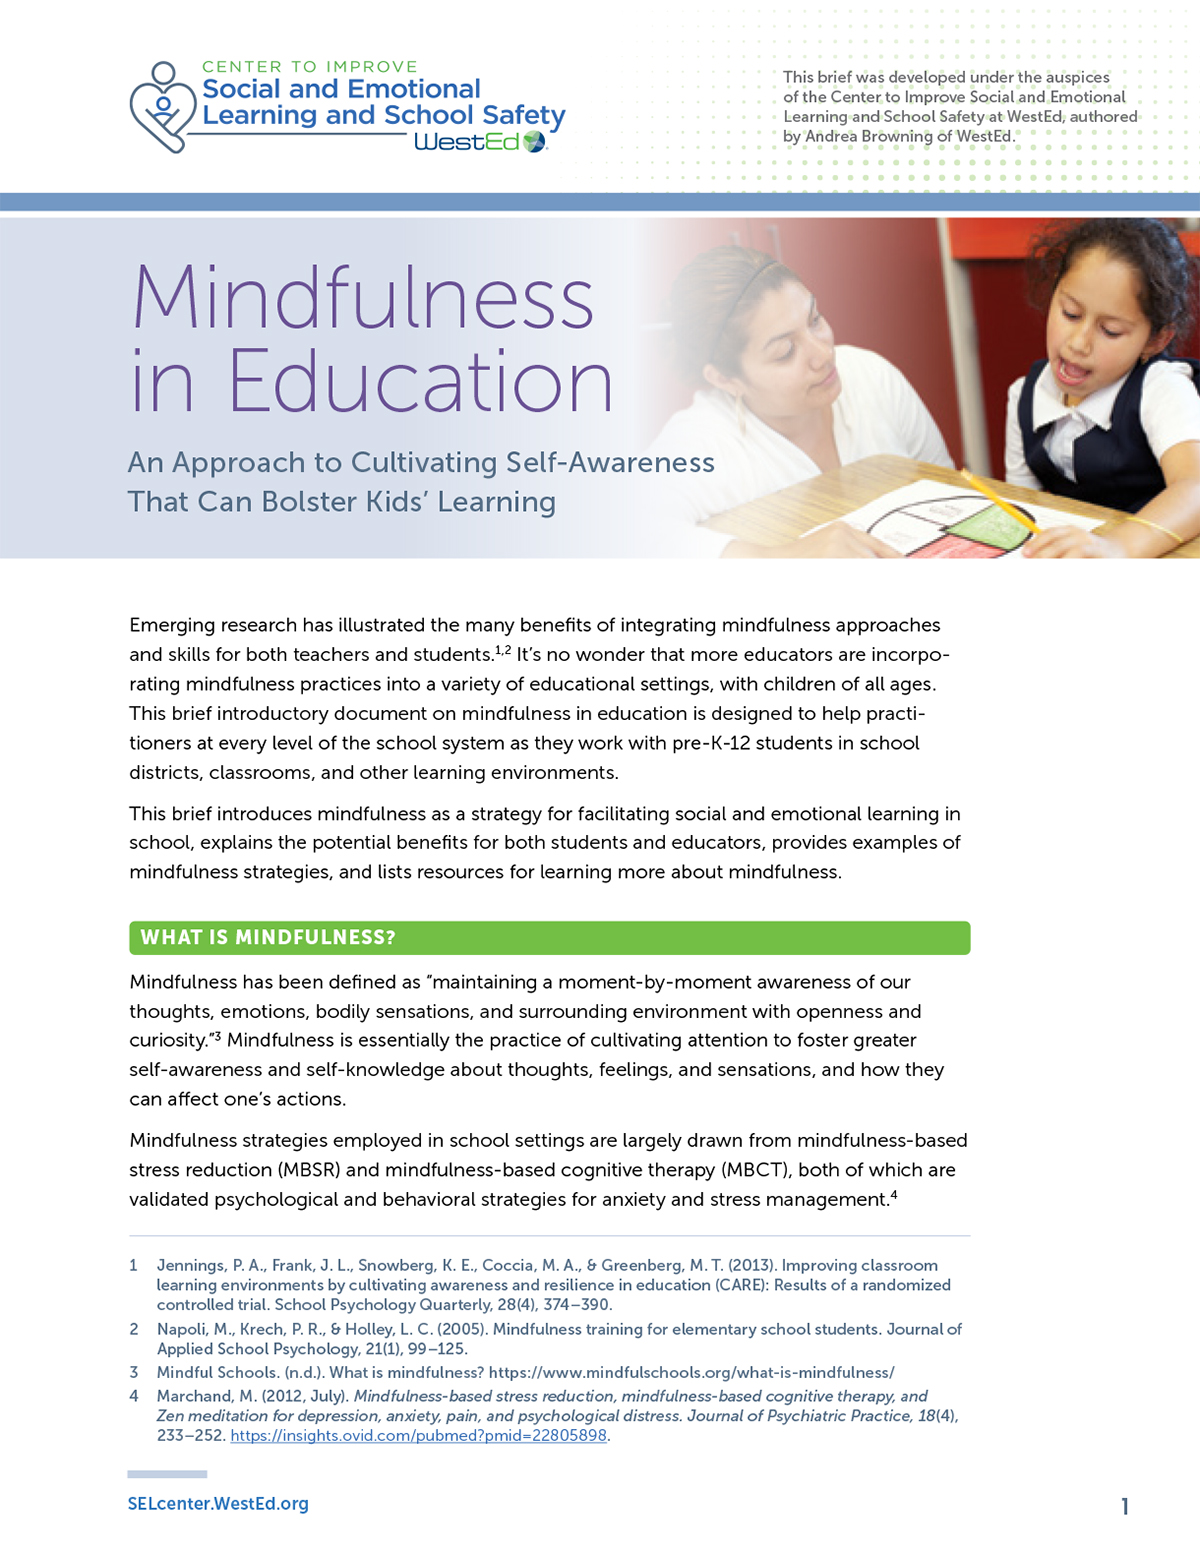 Mindfulness in Education